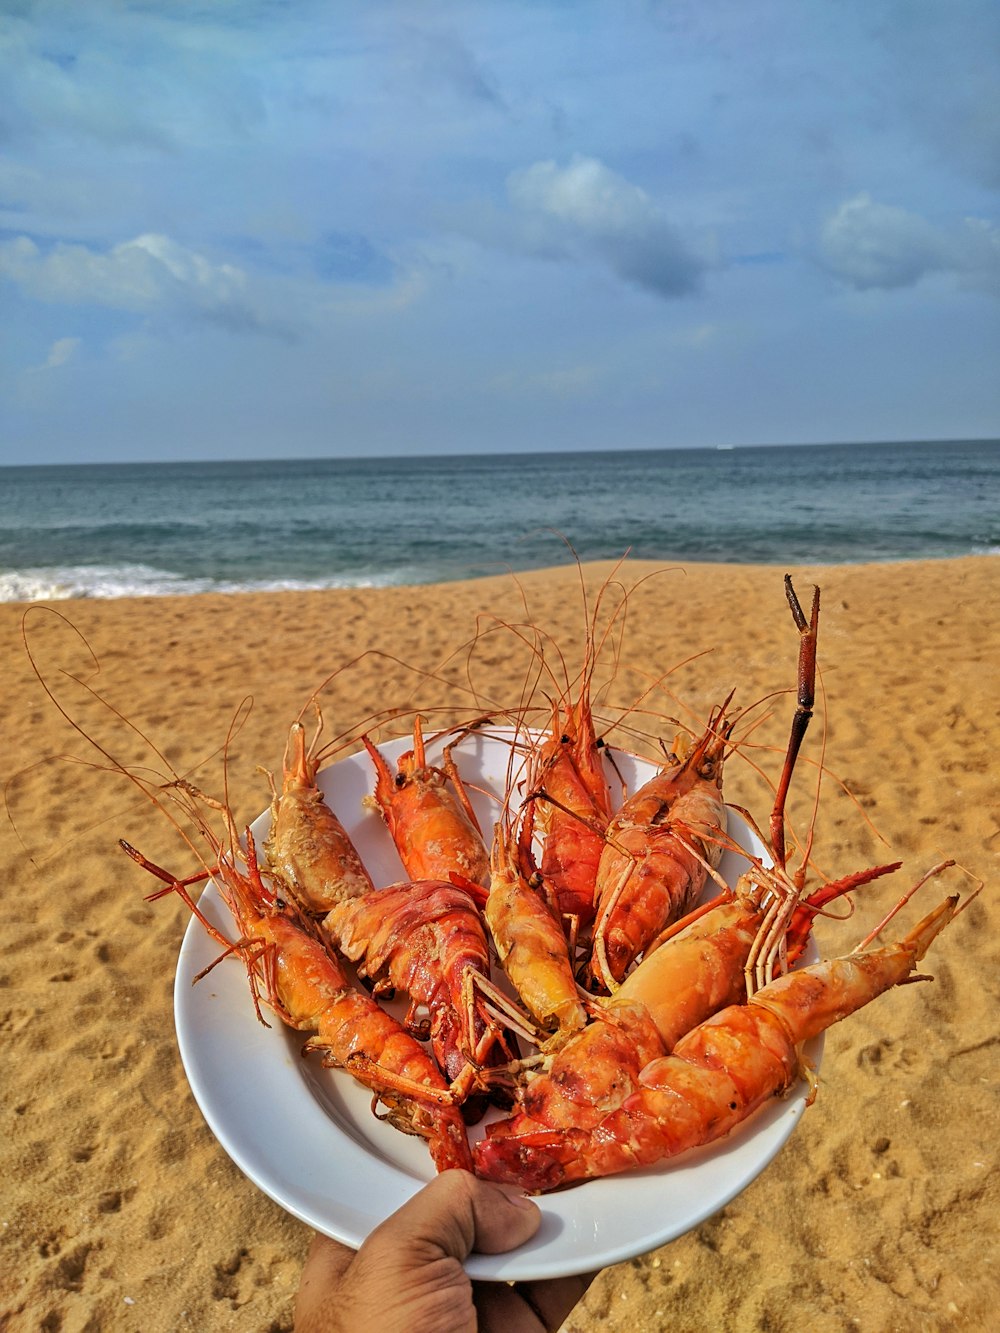 red lobster on white plate on beach during daytime